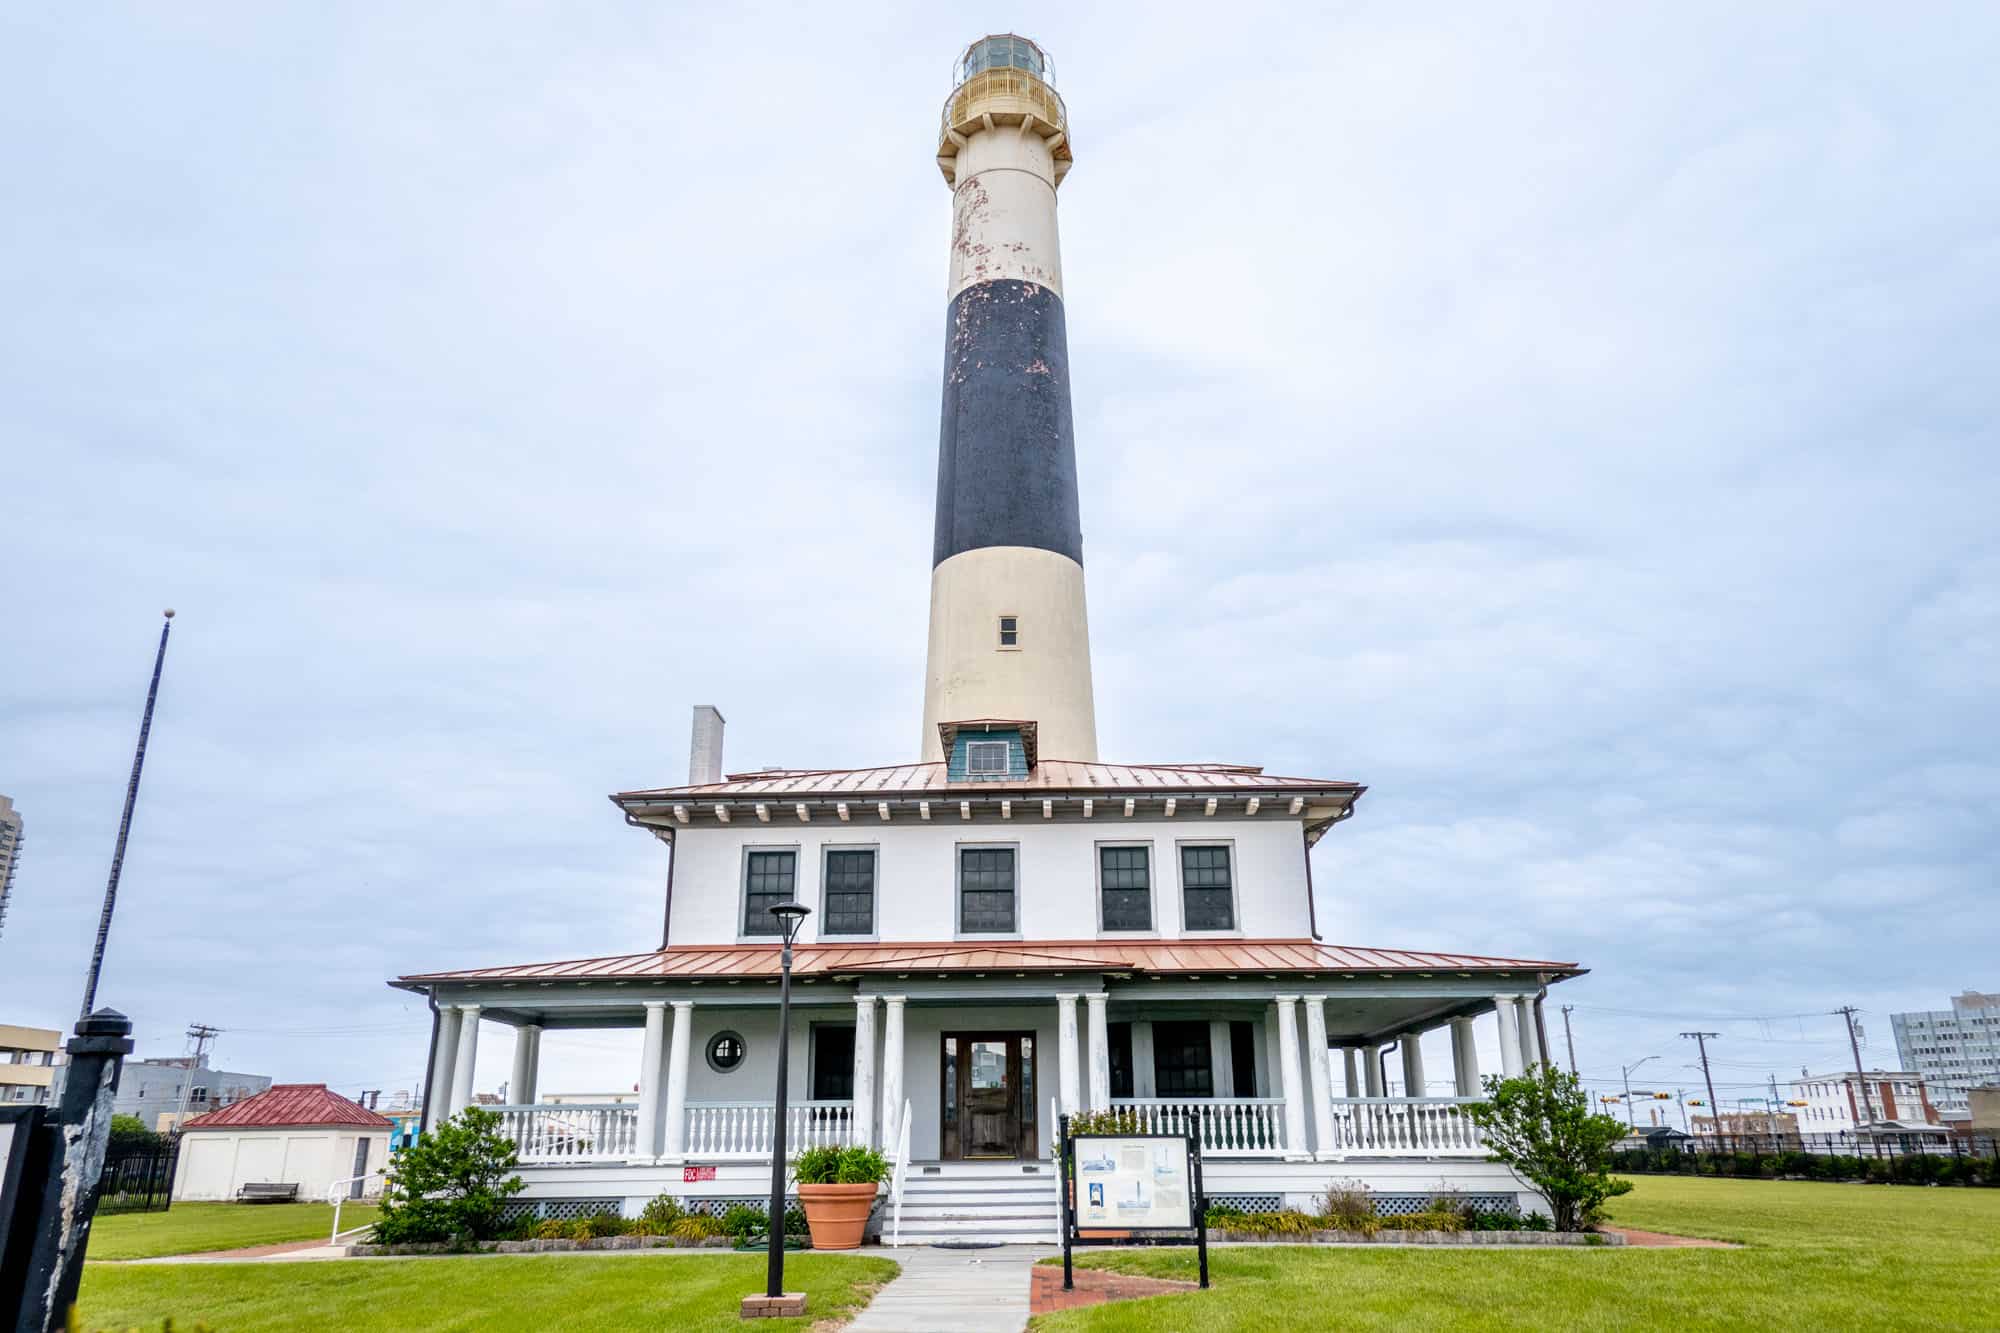 Black and white striped lighthouse towering over a 2-story building